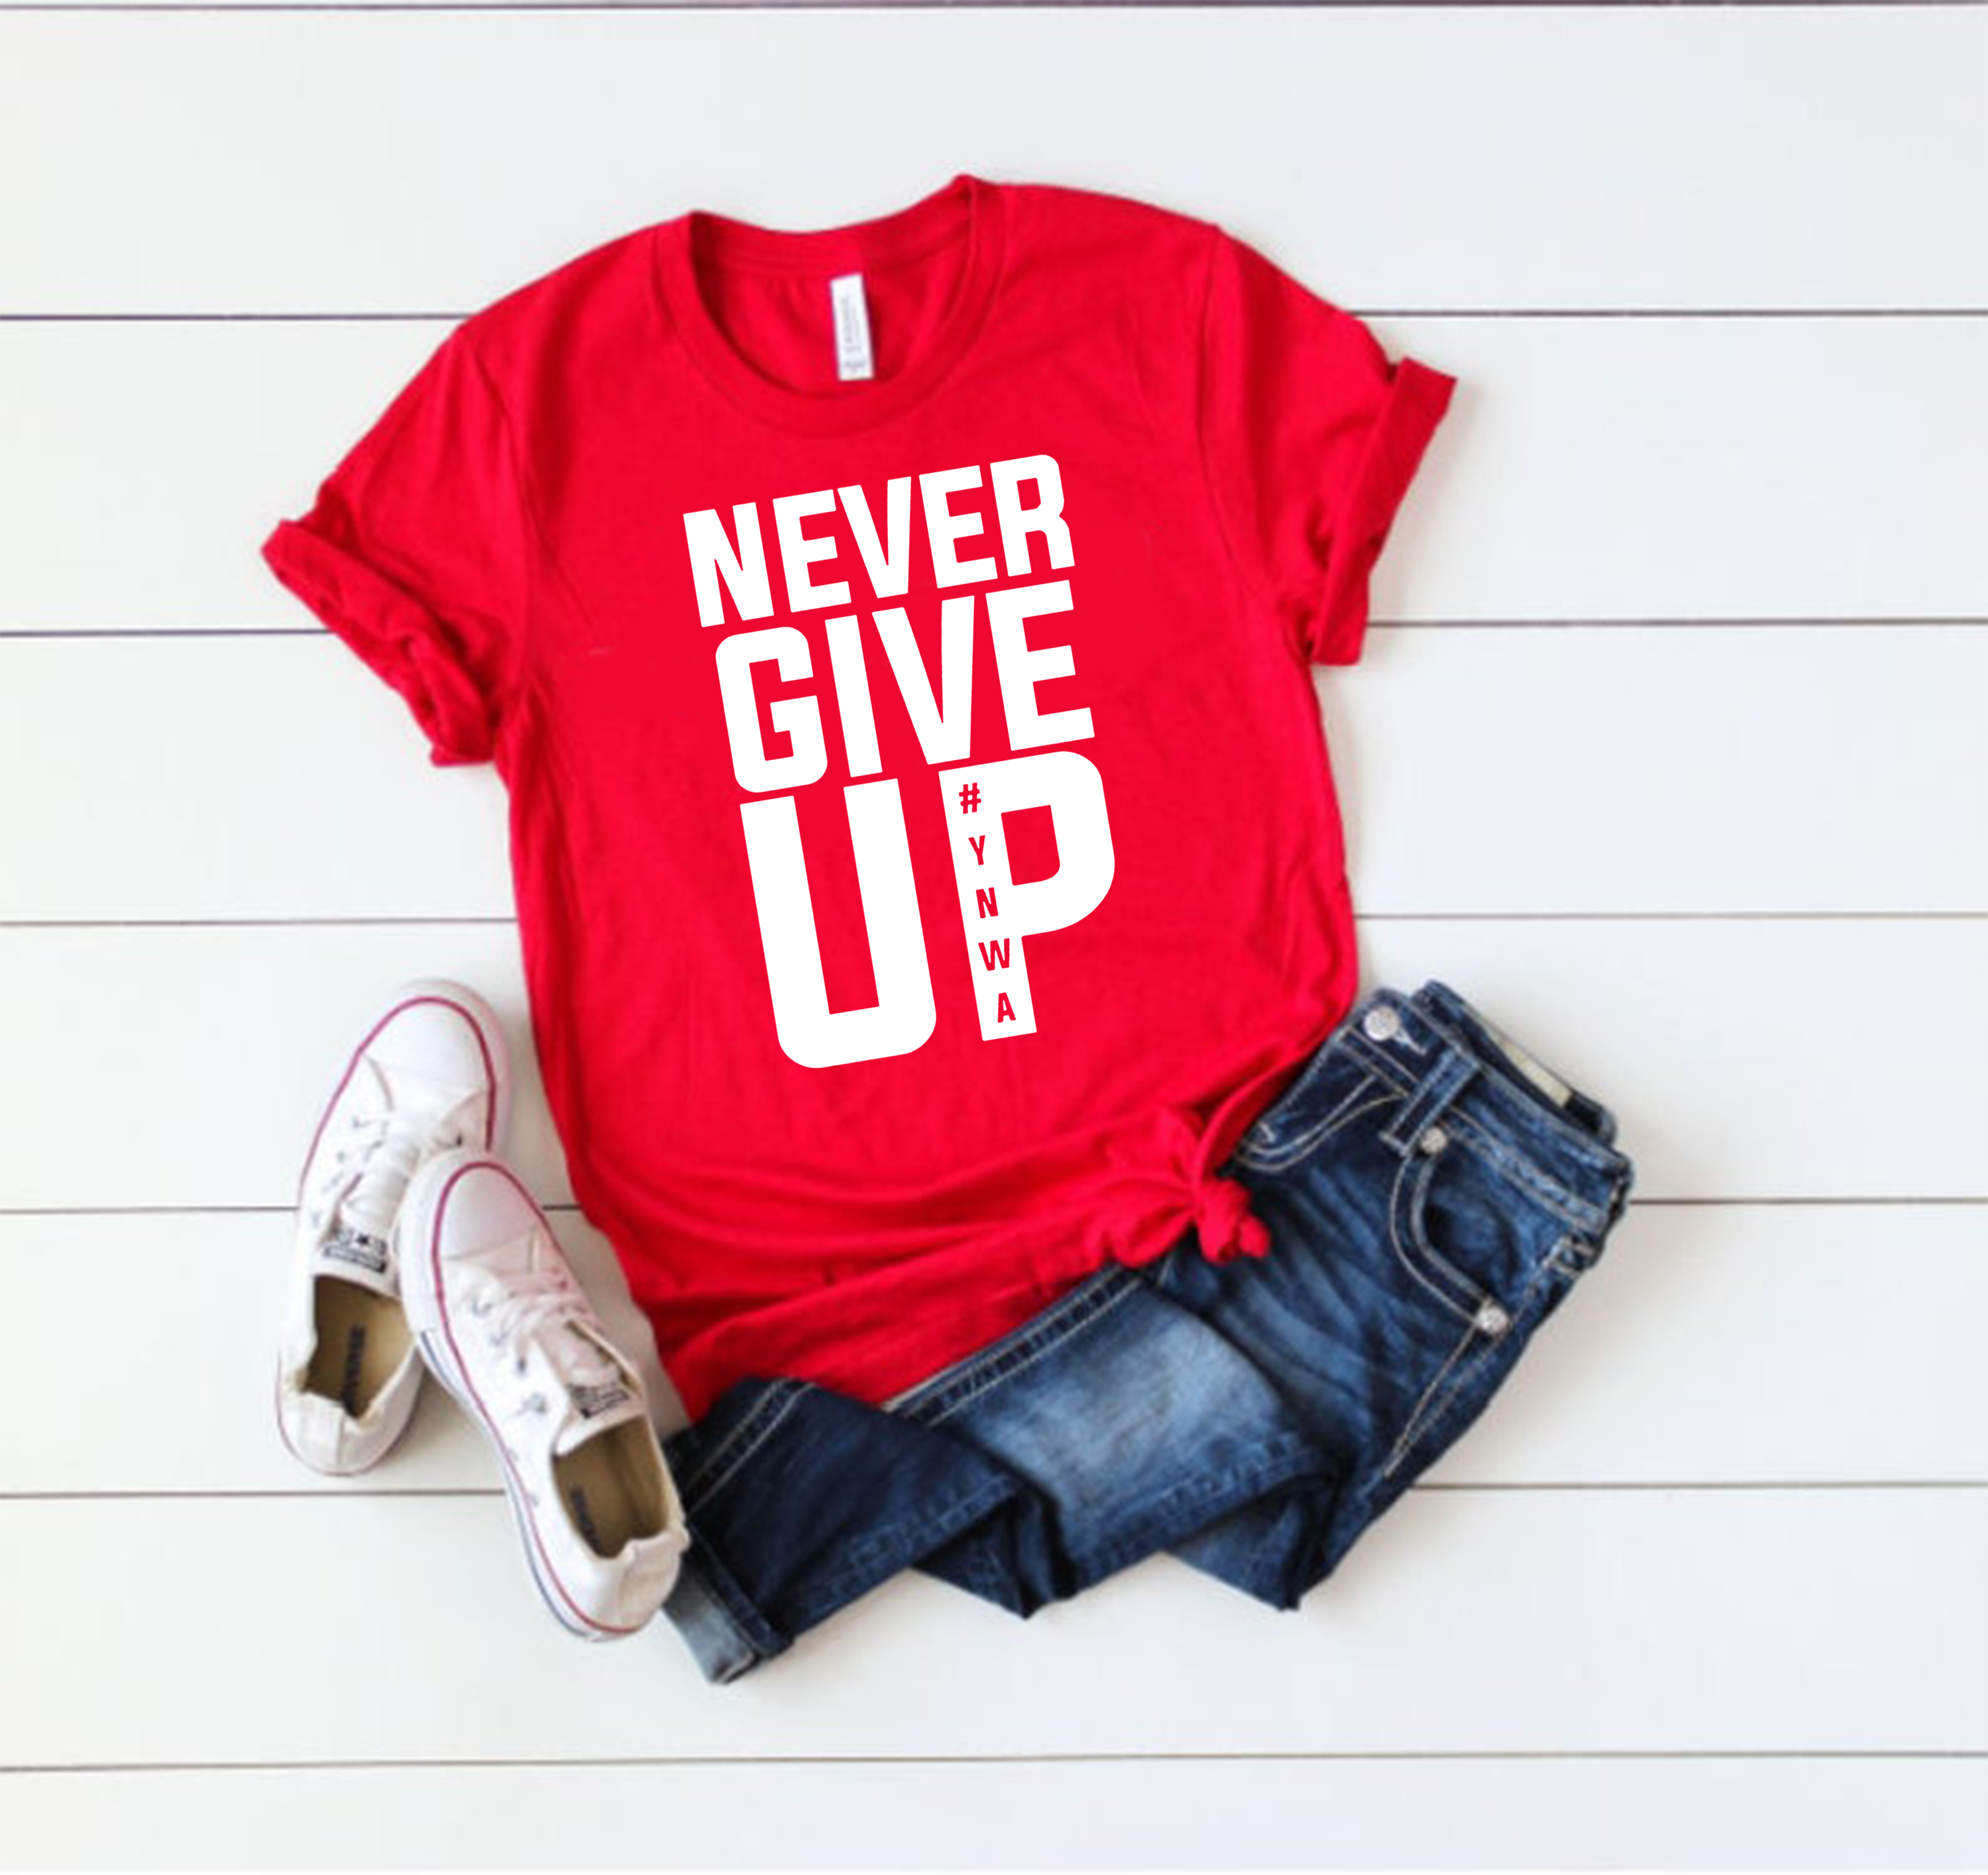 Never Give Up #YNWA Liverpool Champions League 2019 QuoTe Shirt